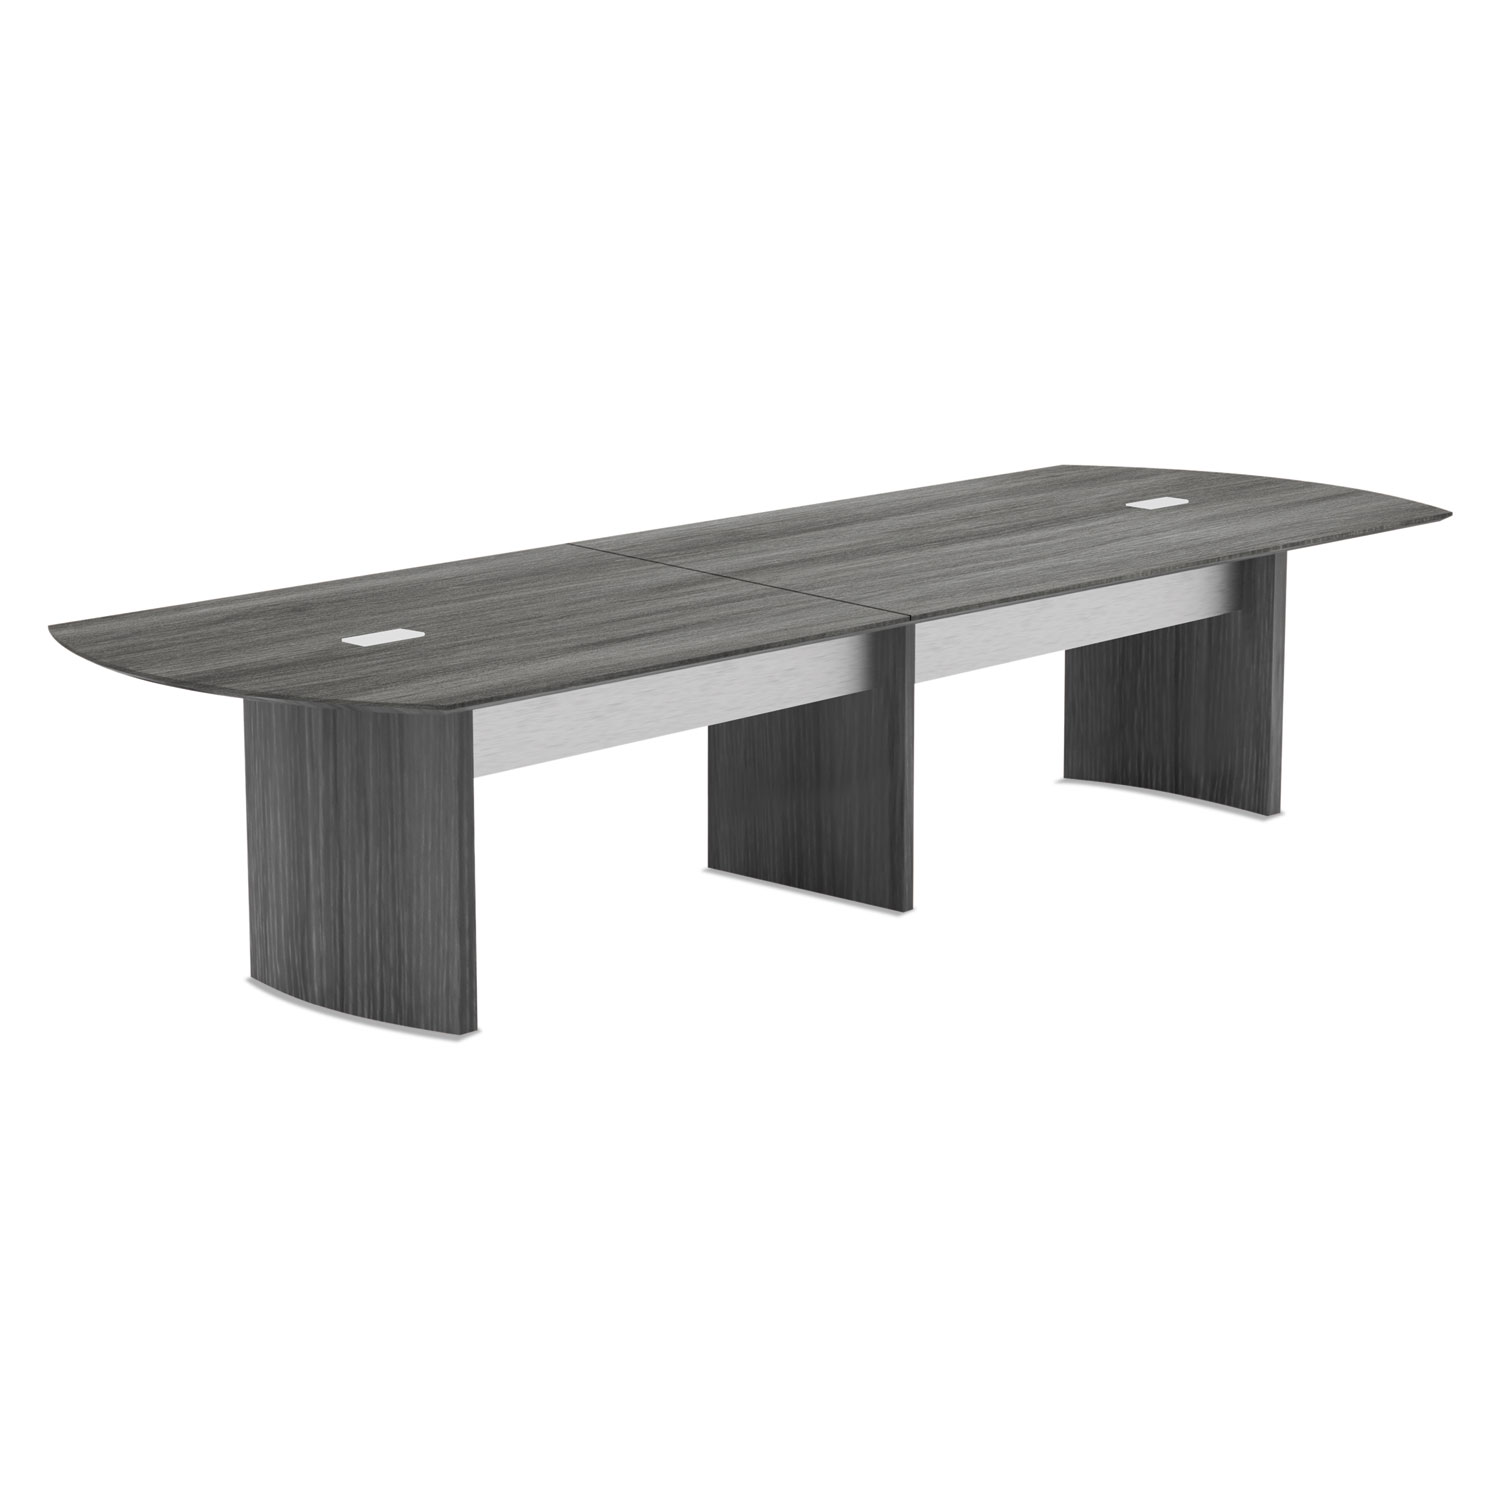  Safco MNMT72STLGS Medina Conference Table Top, Half-Section, 72 x 48, Gray Steel (MLNMNMT72STLGS) 